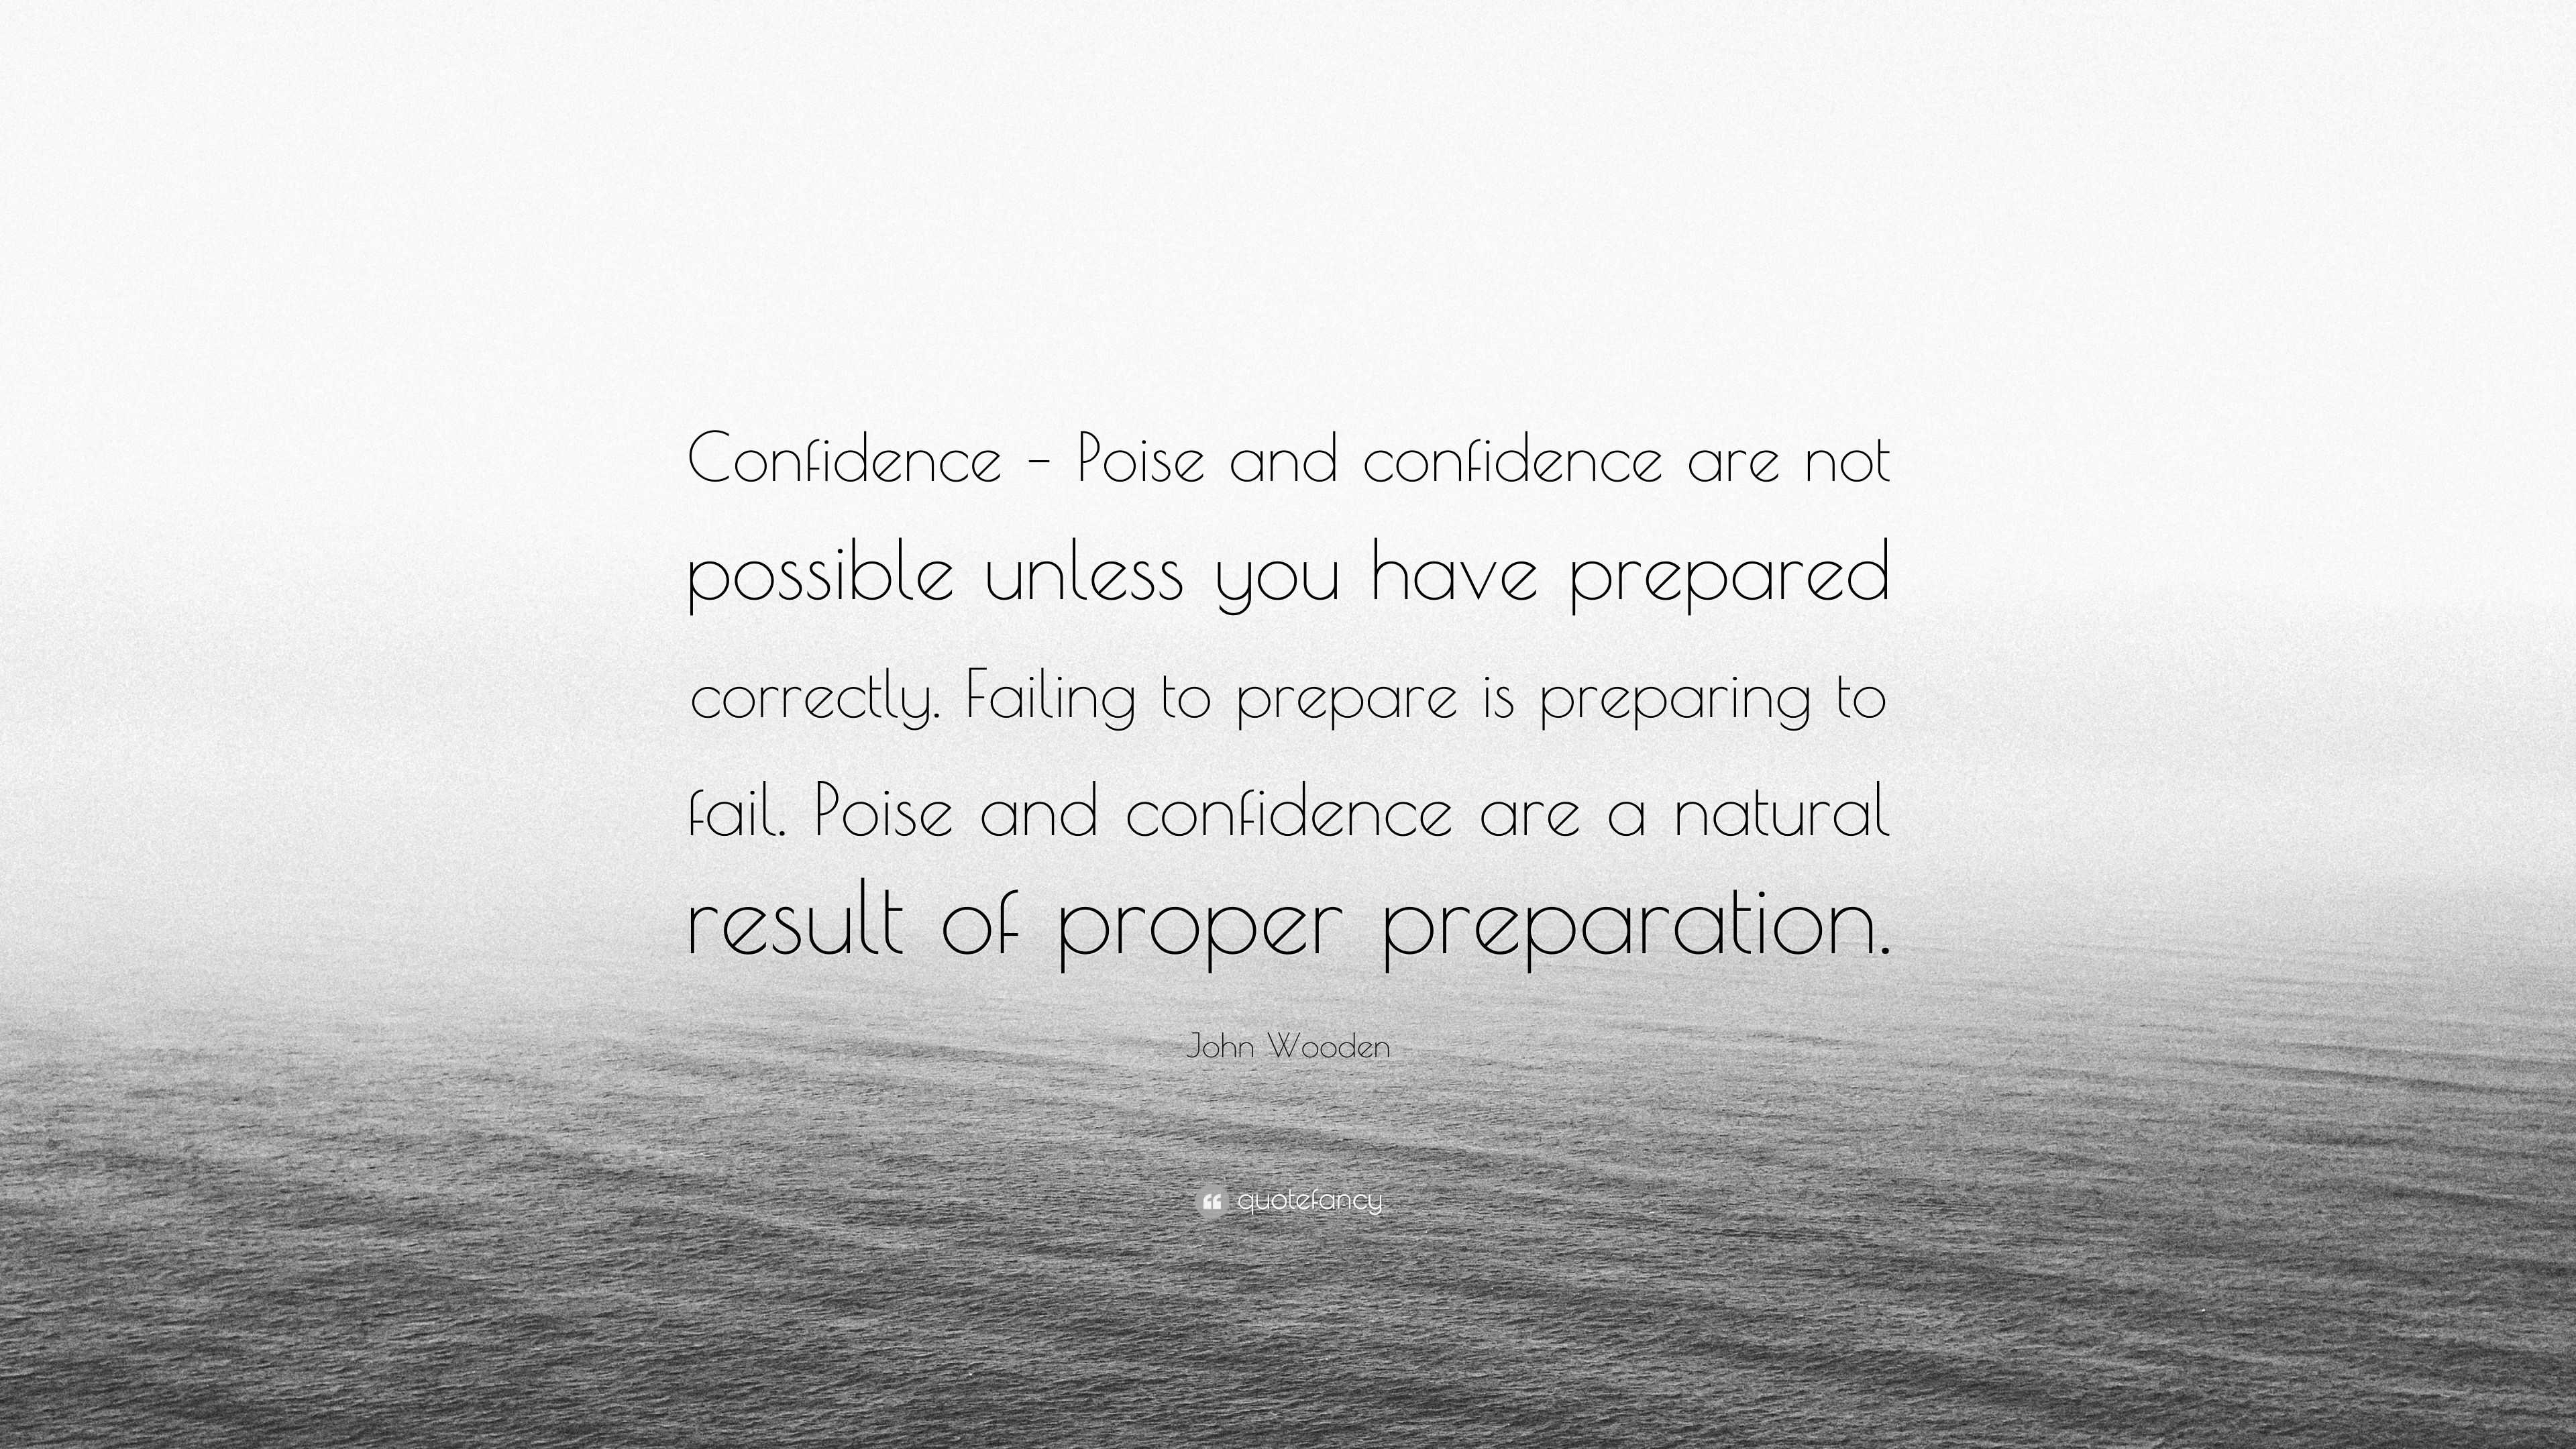 John Wooden Quote: "Confidence - Poise and confidence are not possible unless you have prepared ...